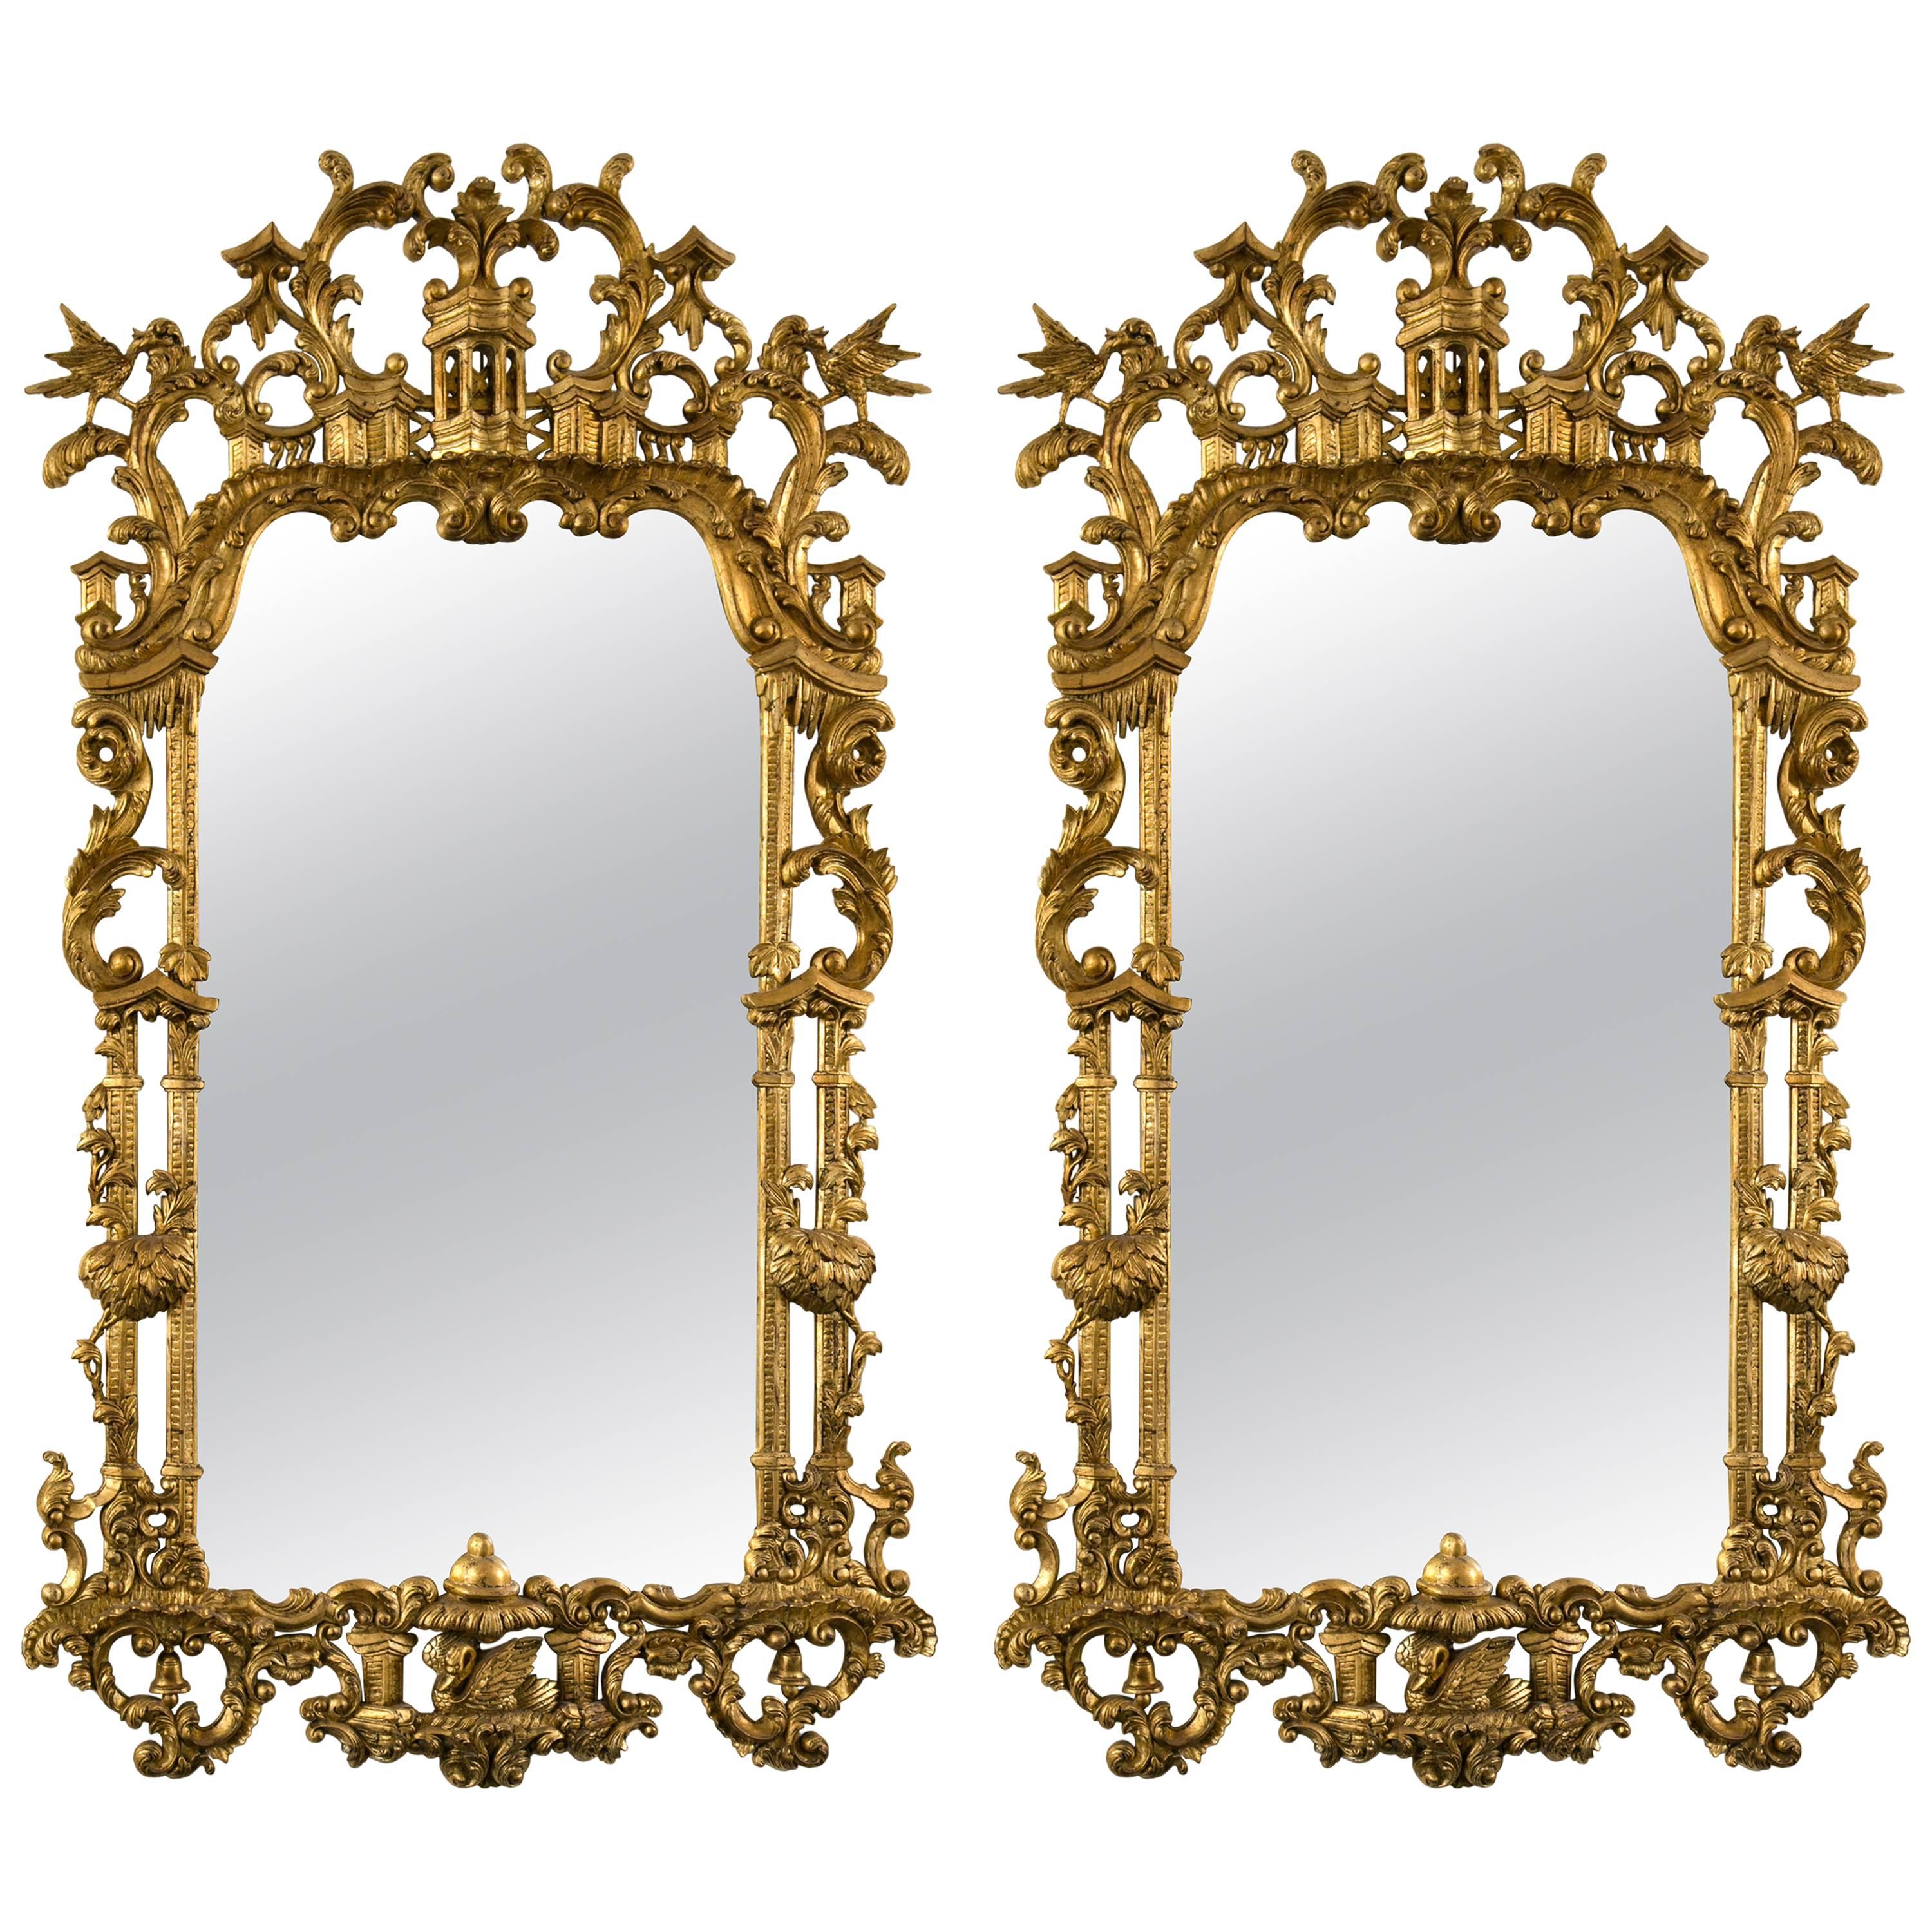 Pair of Monumental Gilt Gold Carved Chippendale Style Wall or Console Mirrors